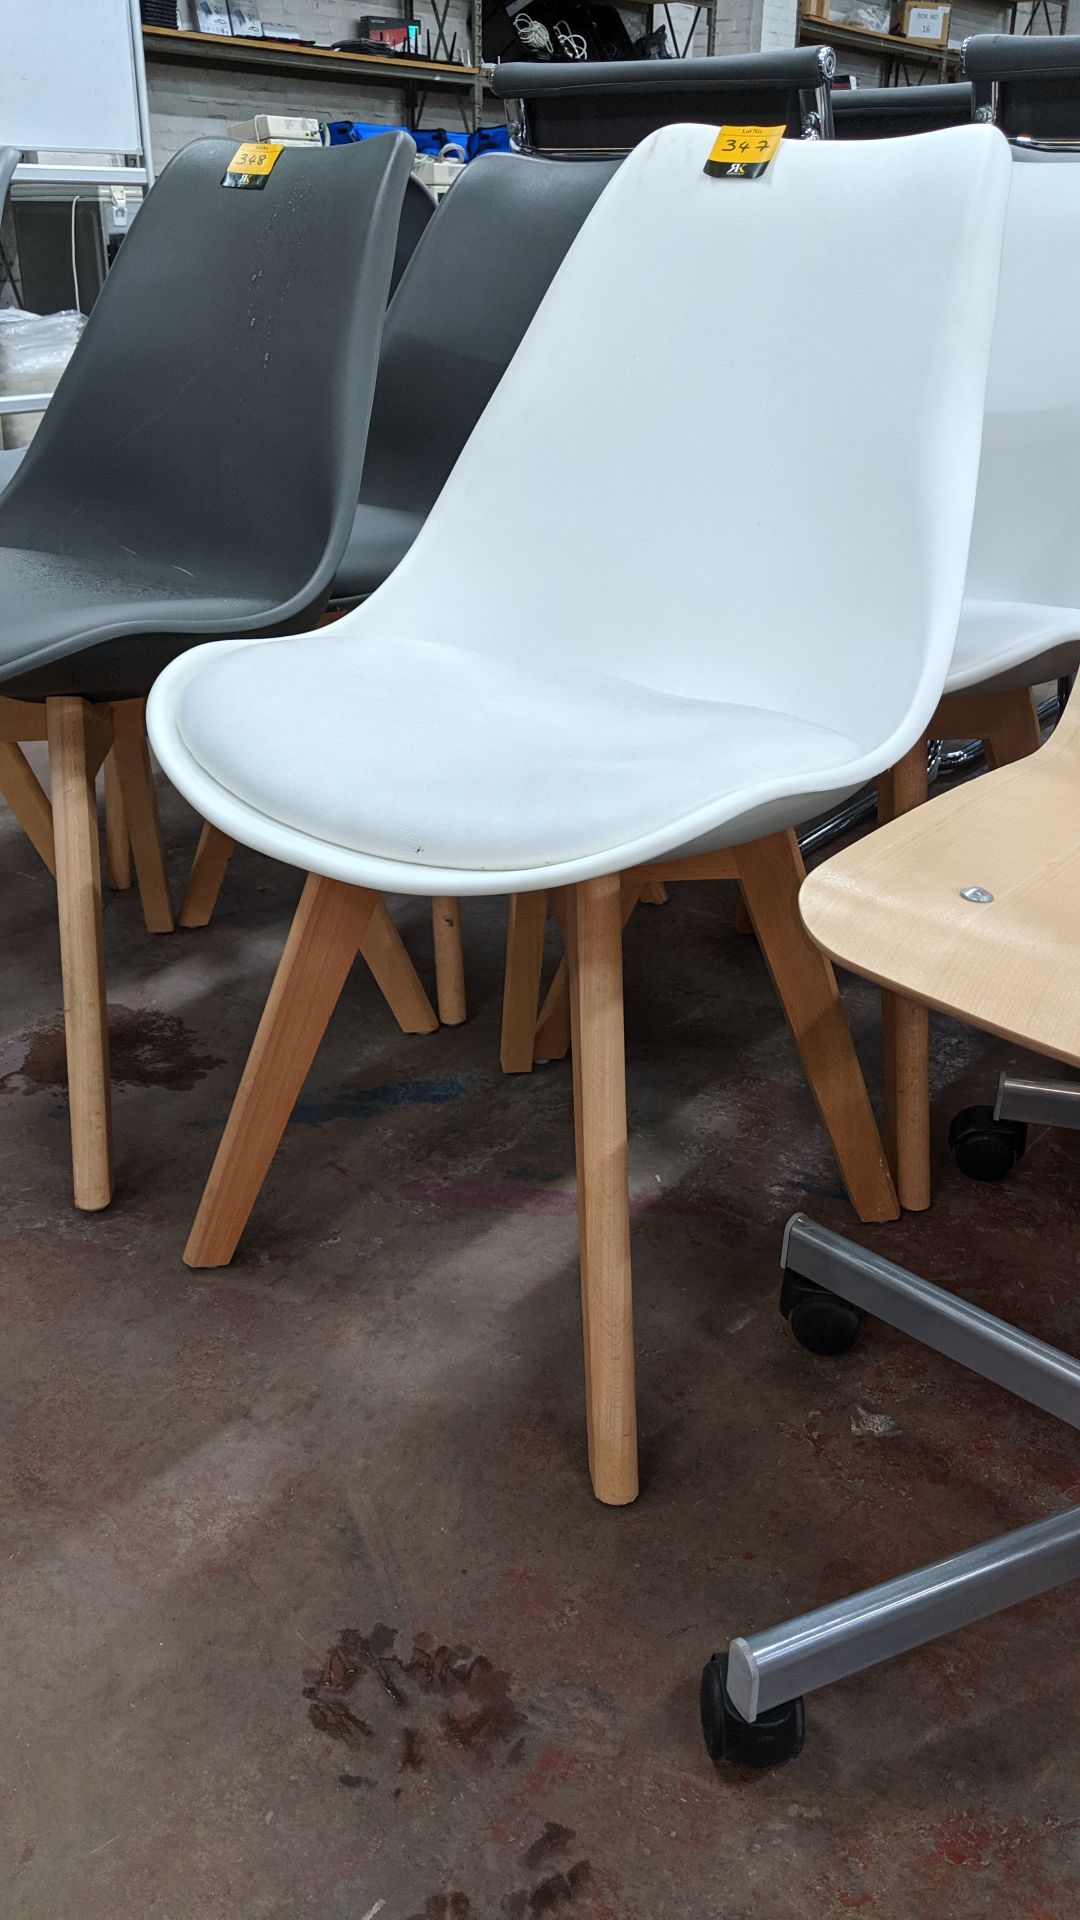 Pair of white chairs on wooden legs with upholstered seat bases NB. Lots 347 - 349 consist of the - Image 2 of 4